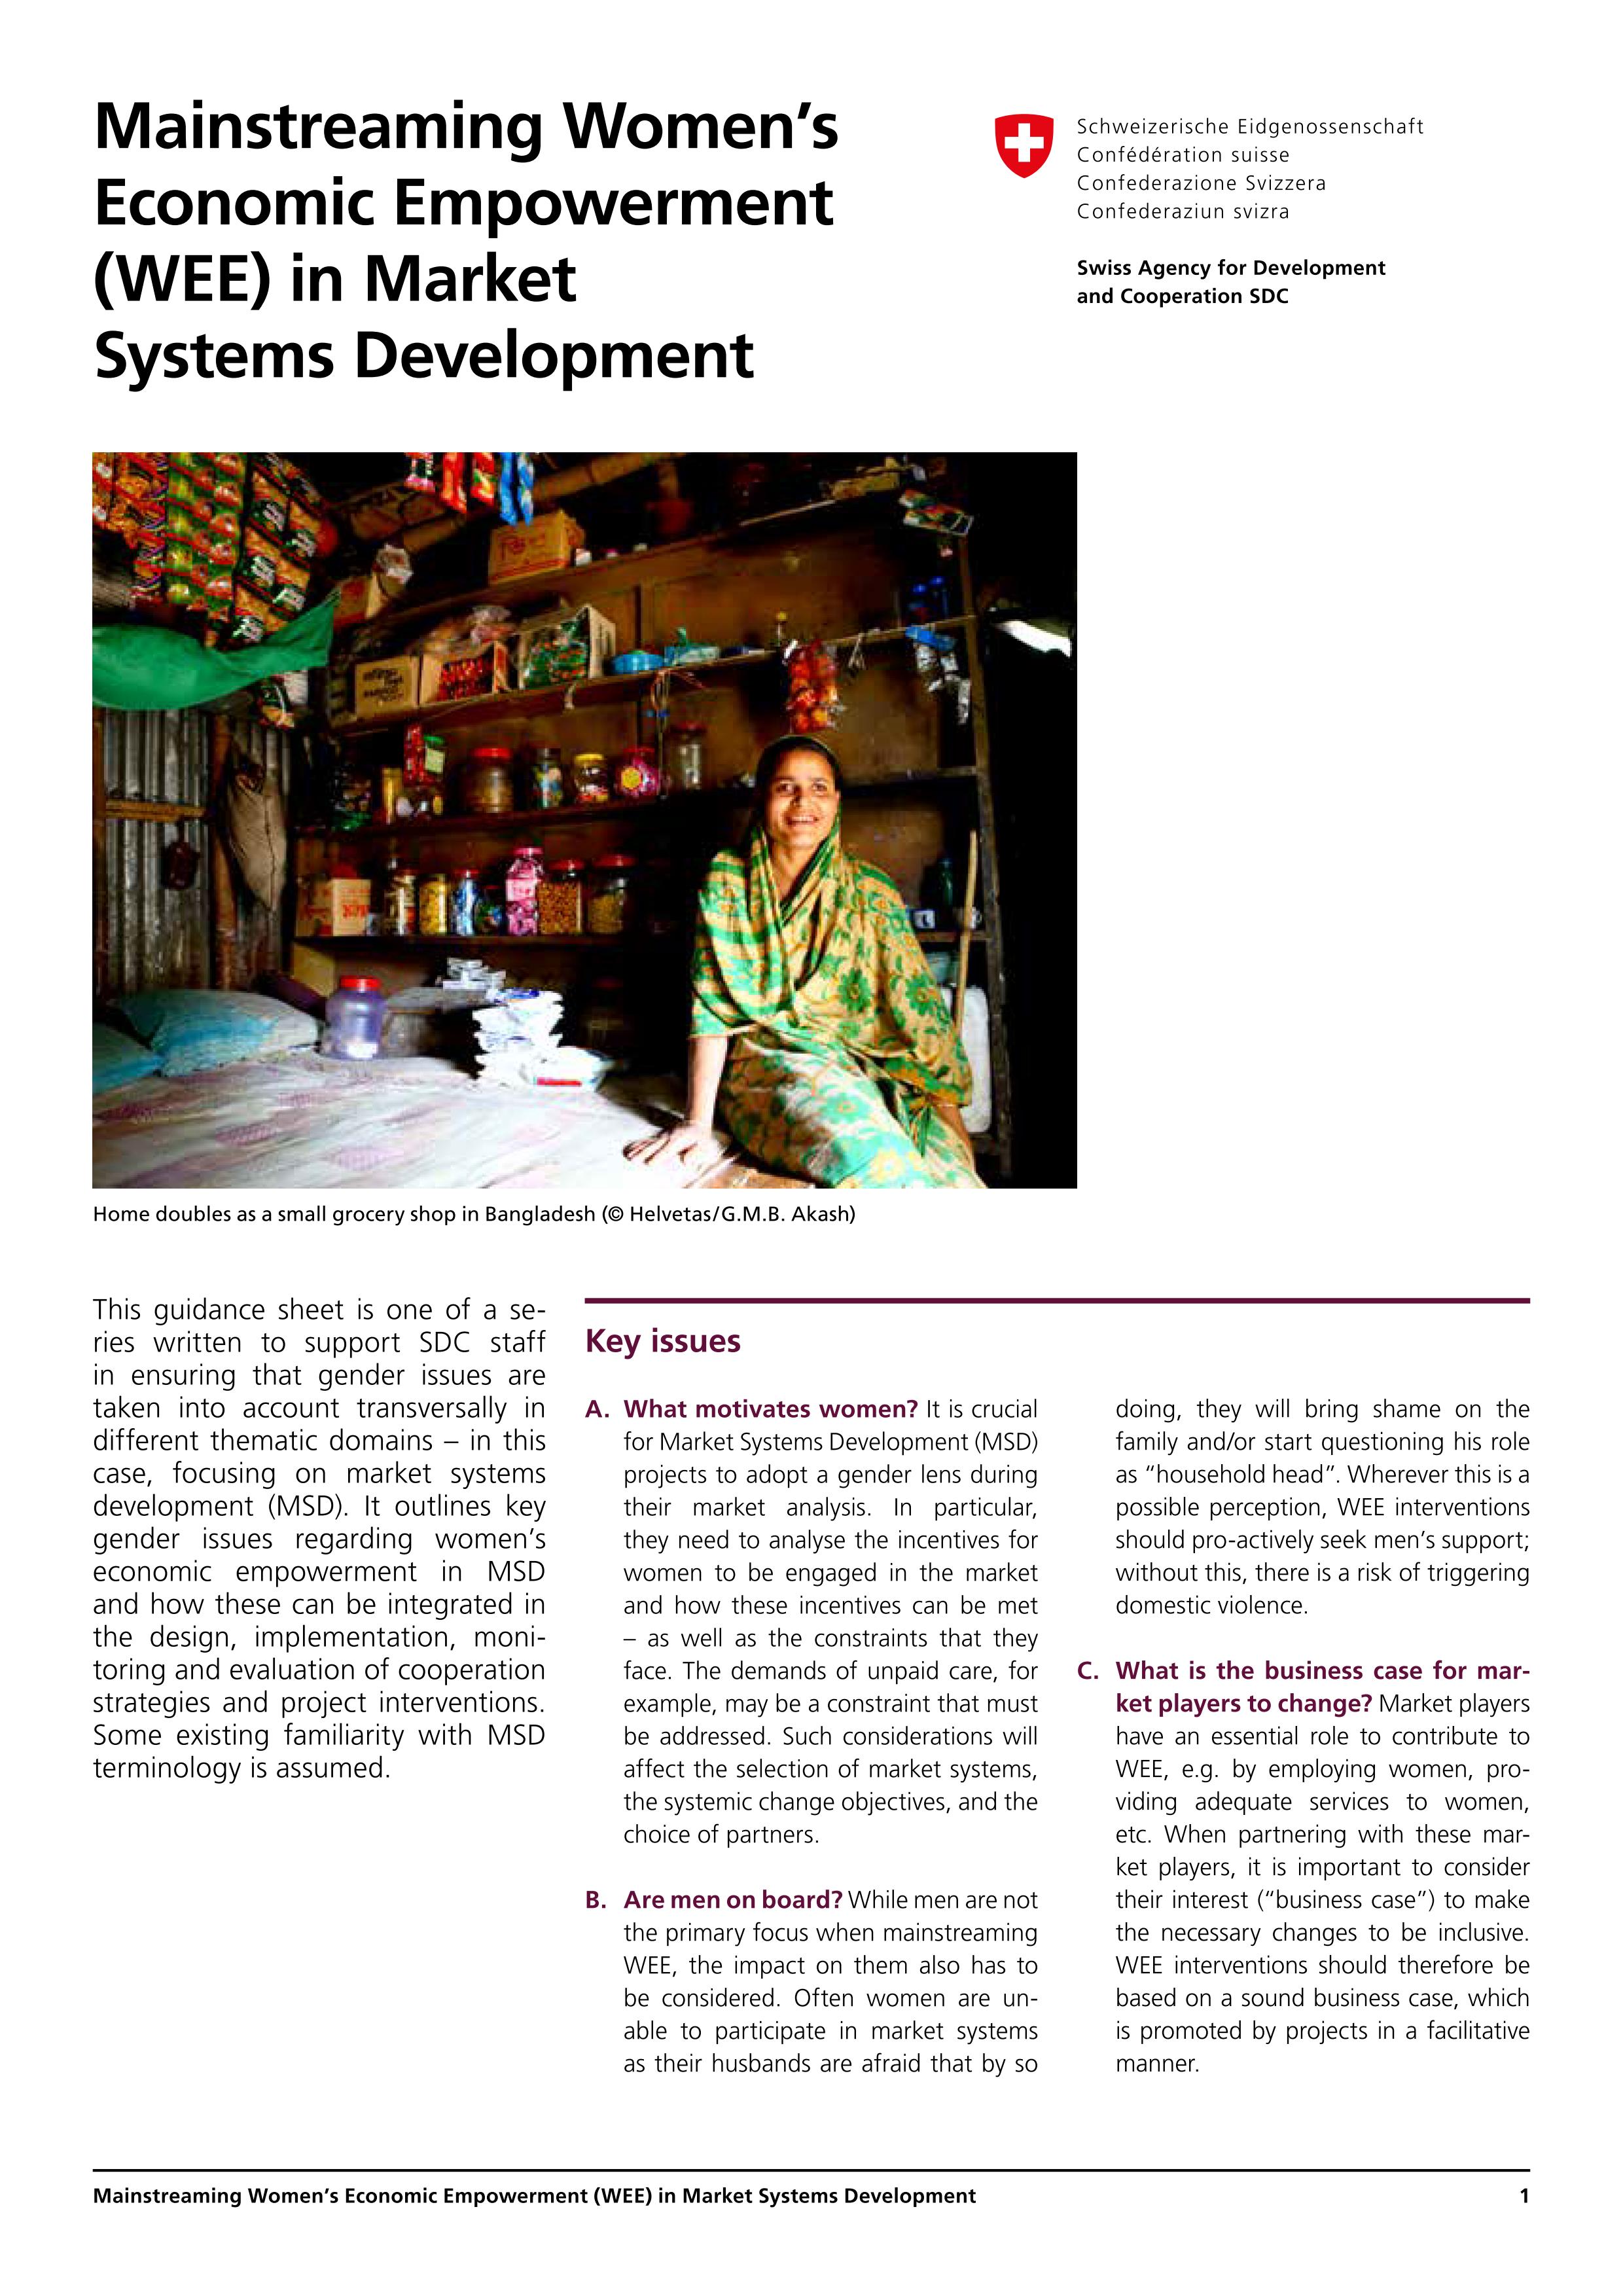 Mainstreaming WEE in Market Systems Development